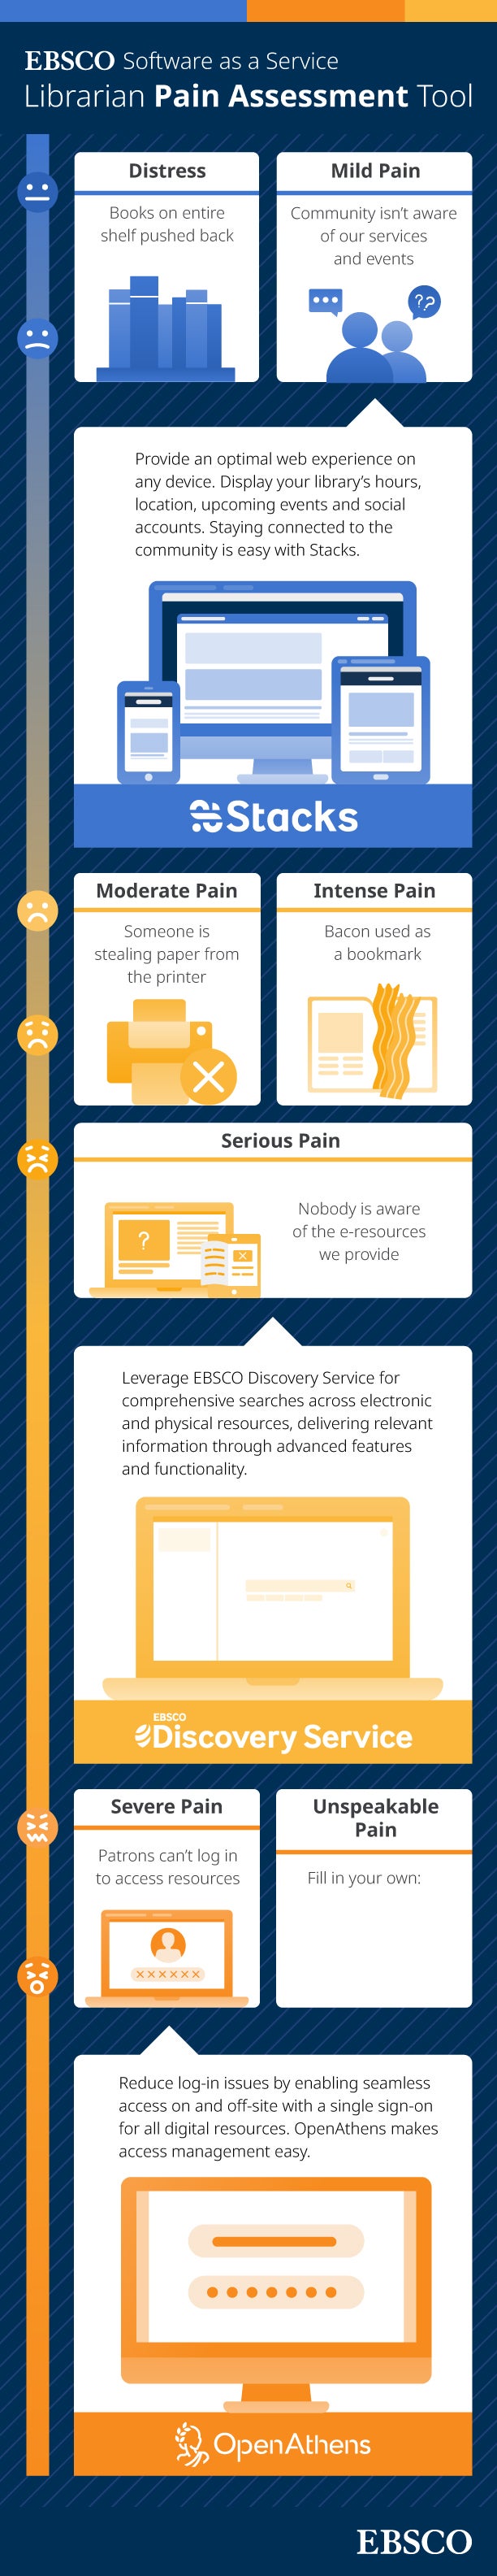 ebsco saas librarian pain assessment tool infographic   